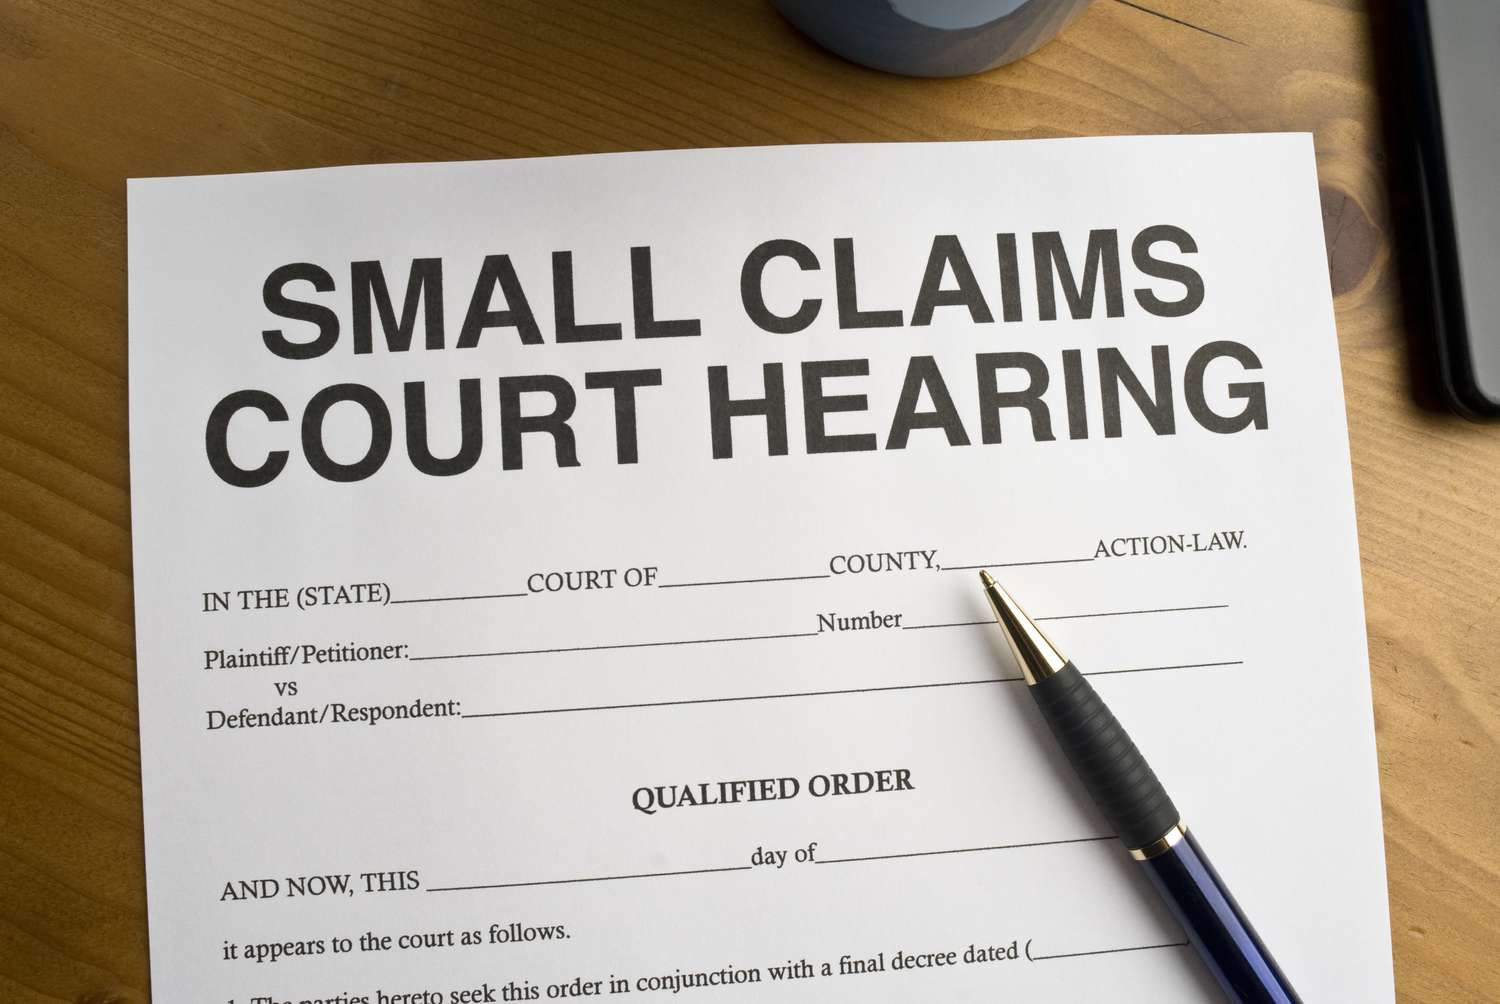 How To Reschedule Your Small Claims Court Hearing And Avoid Paying Opponent's Fees